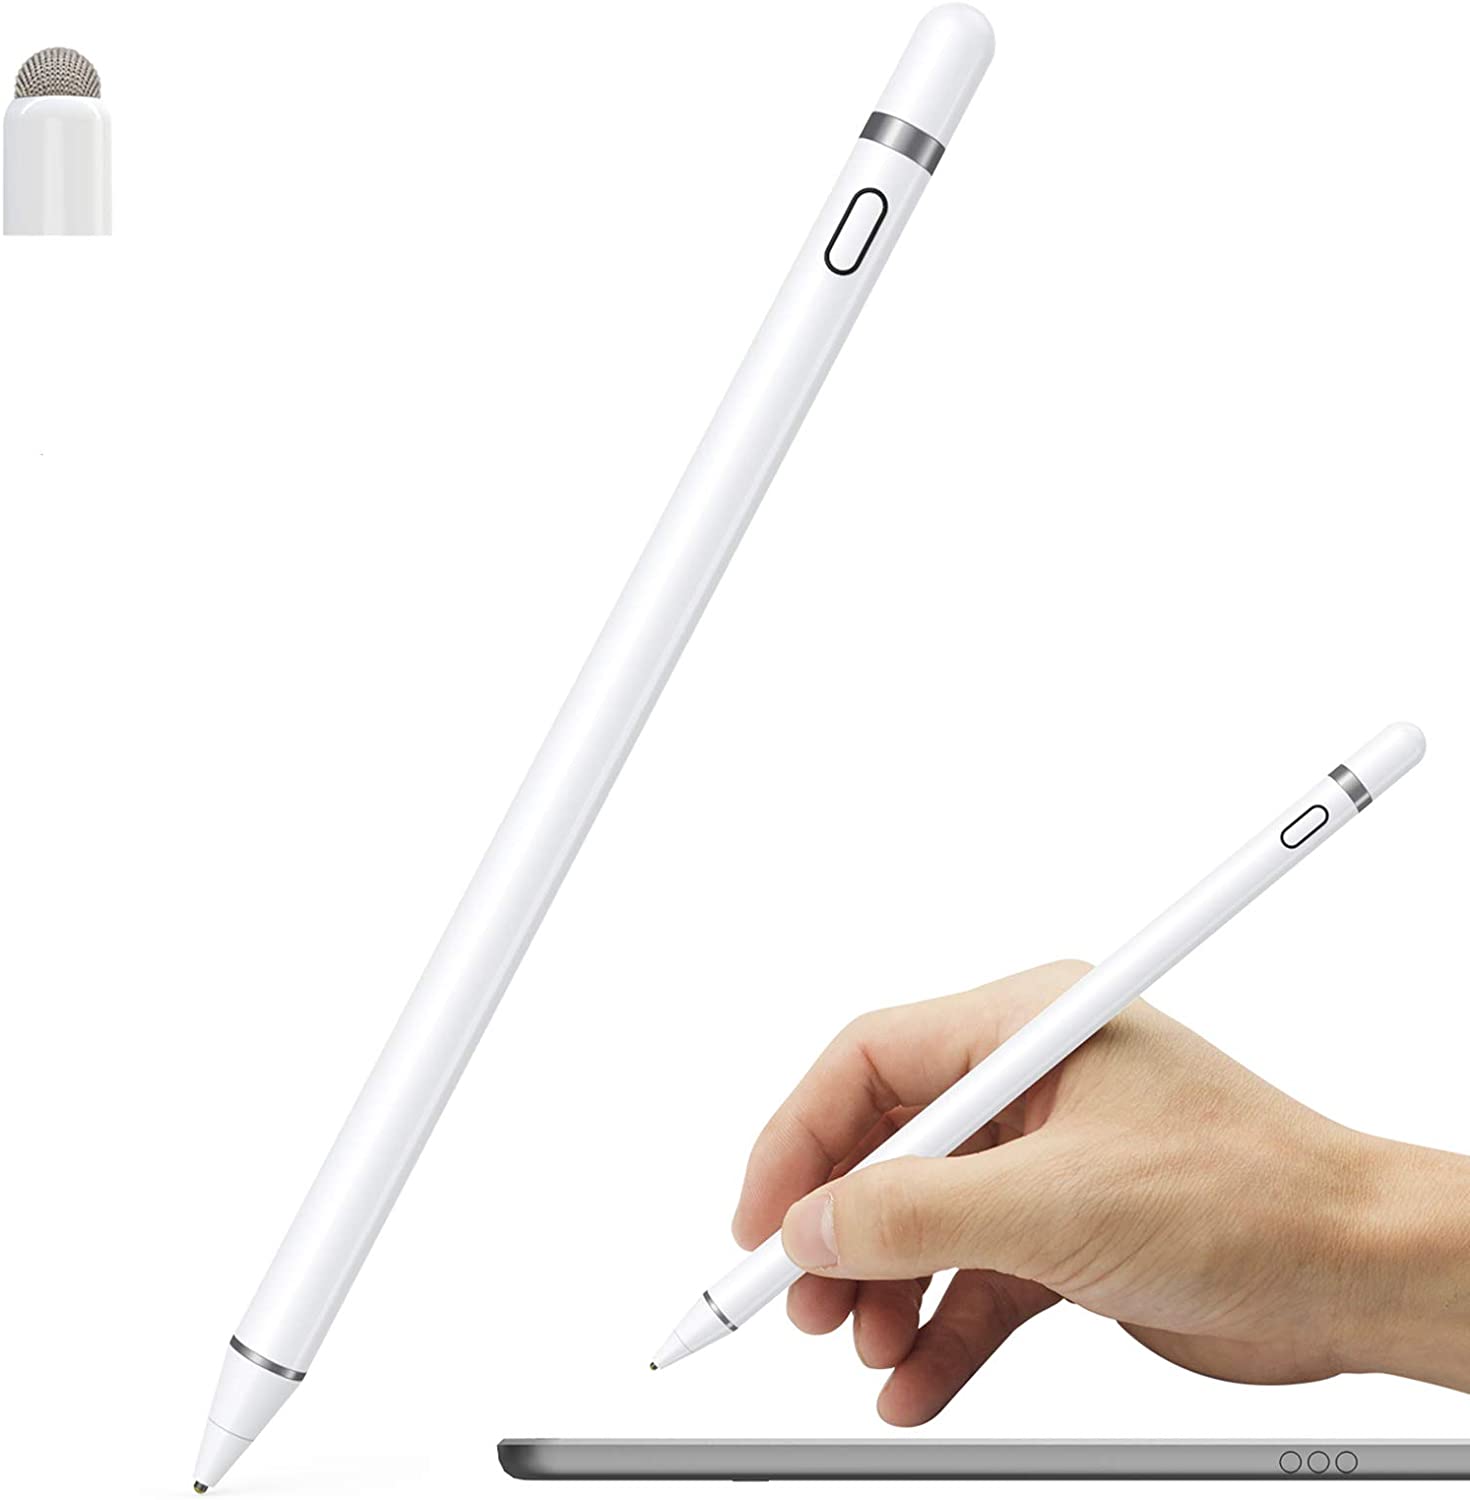 Best-Selling Cute Stylus Pens For Touch Screens - Active Stylus Pen Compatible for iOS&Android Touch Screens, Pencil for iPad with Dual Touch Function,Rechargeable Stylus for iPad/iPad Pro/Air...